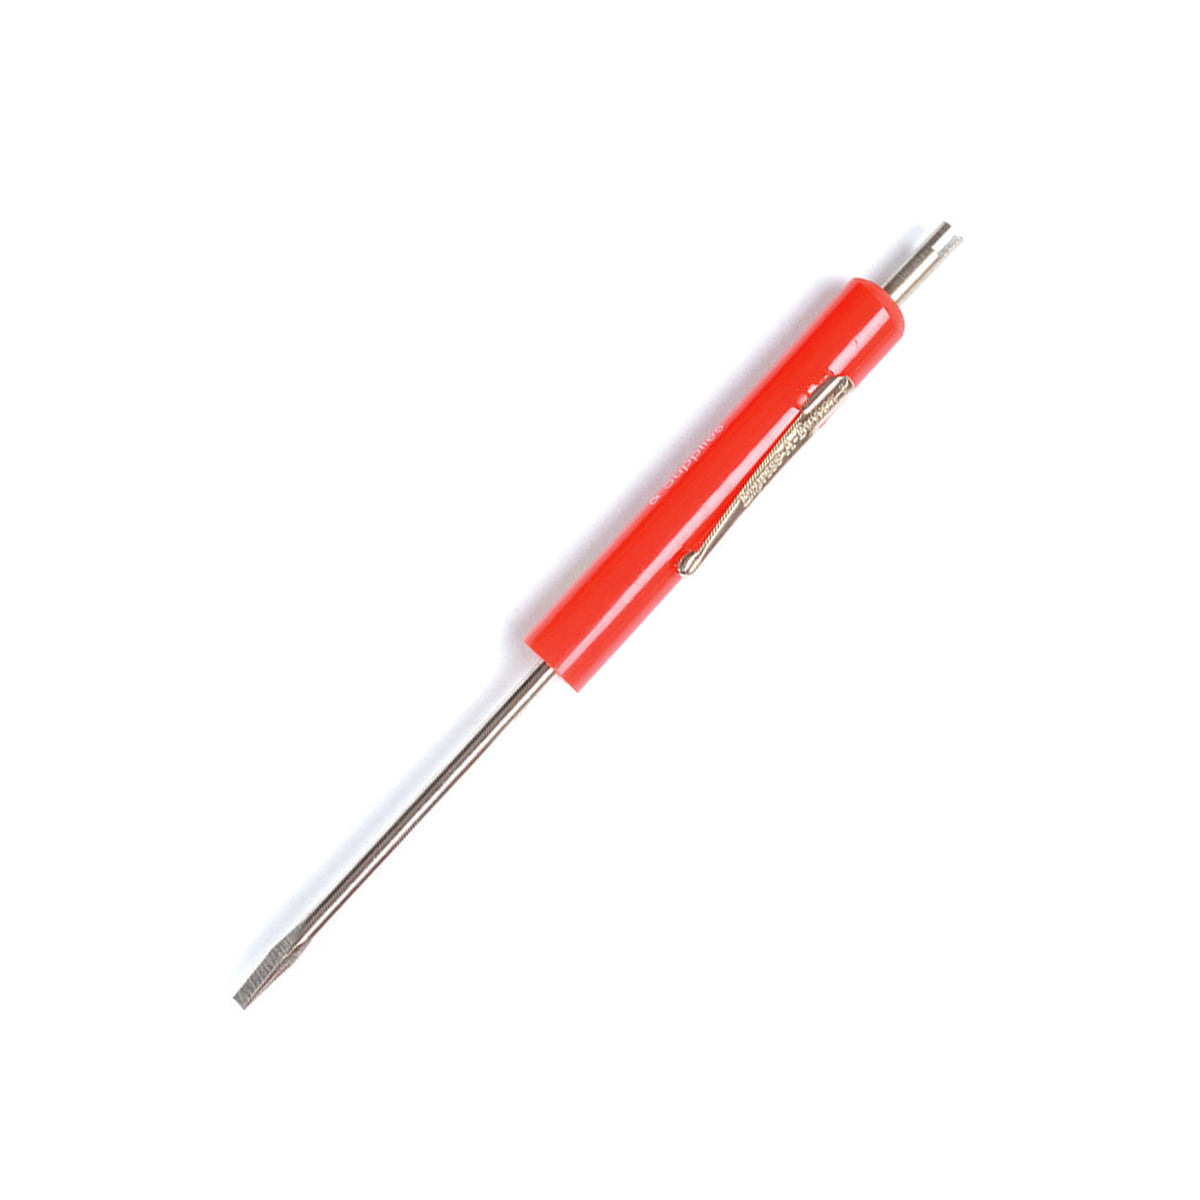 Pocket Screwdriver With Core Tool (19-260)